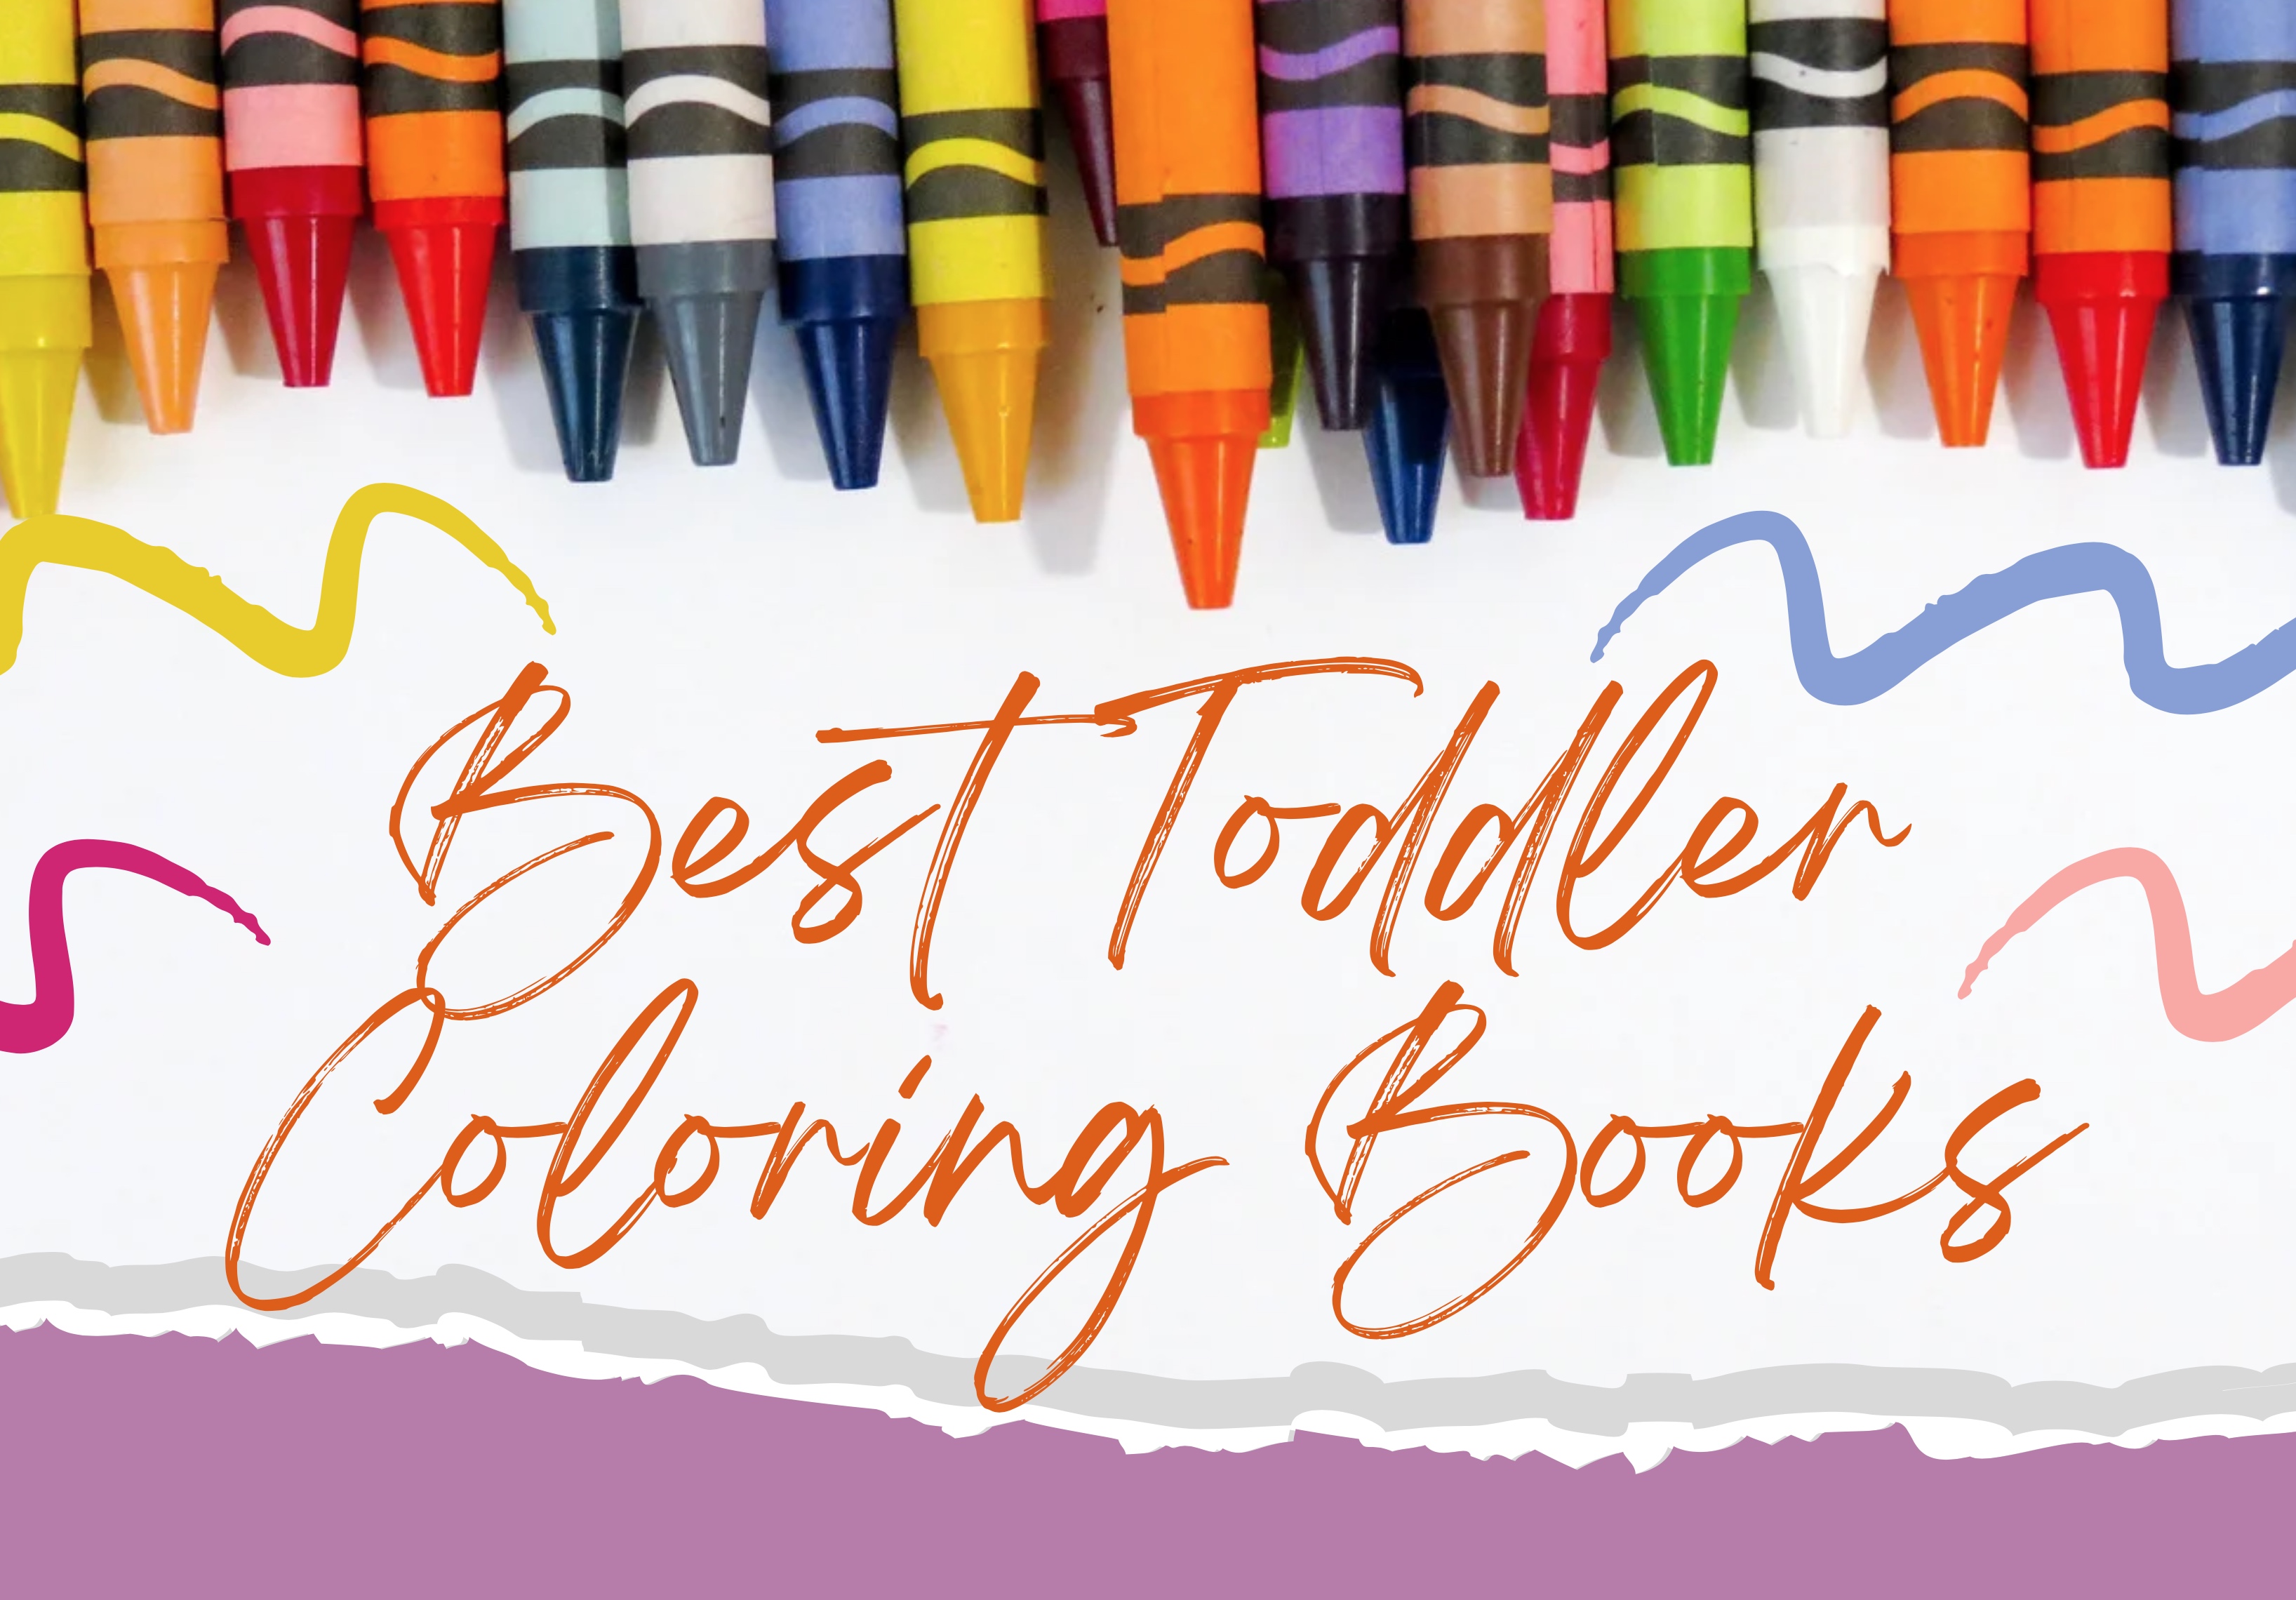 Where to Buy the Best Coloring Books for Toddlers: Top Picks from Willrose Books